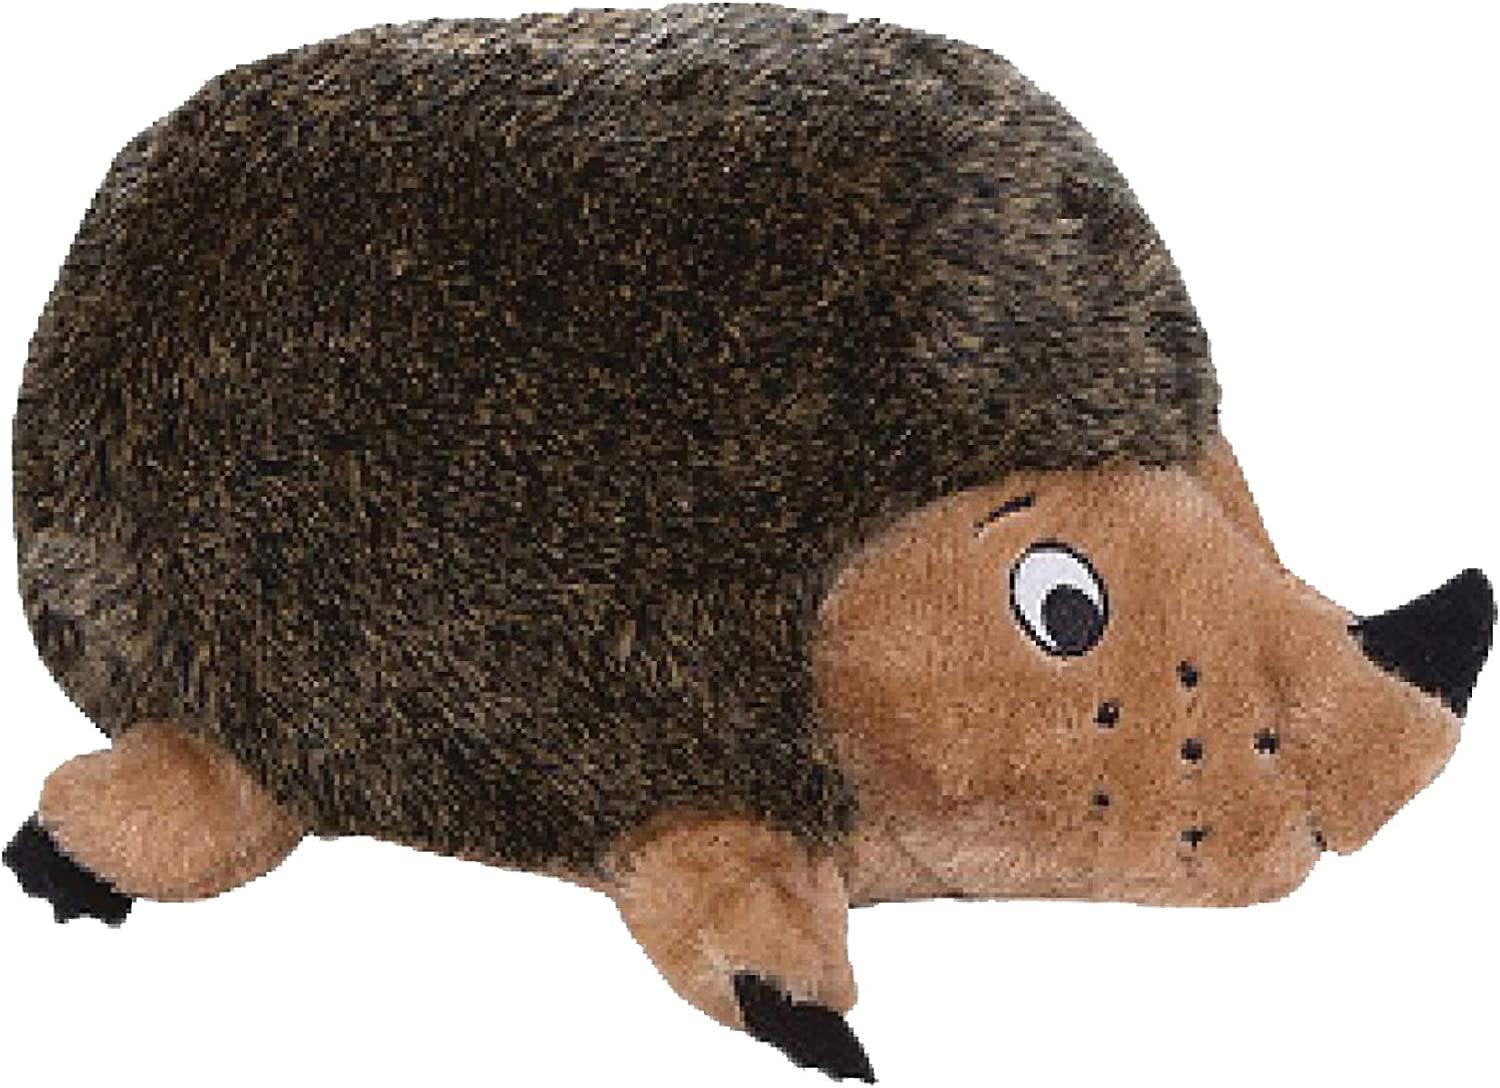 Outward Hound Kyjen Hedgehogz Squeak Toy for Dogs for $6.99 Shipped